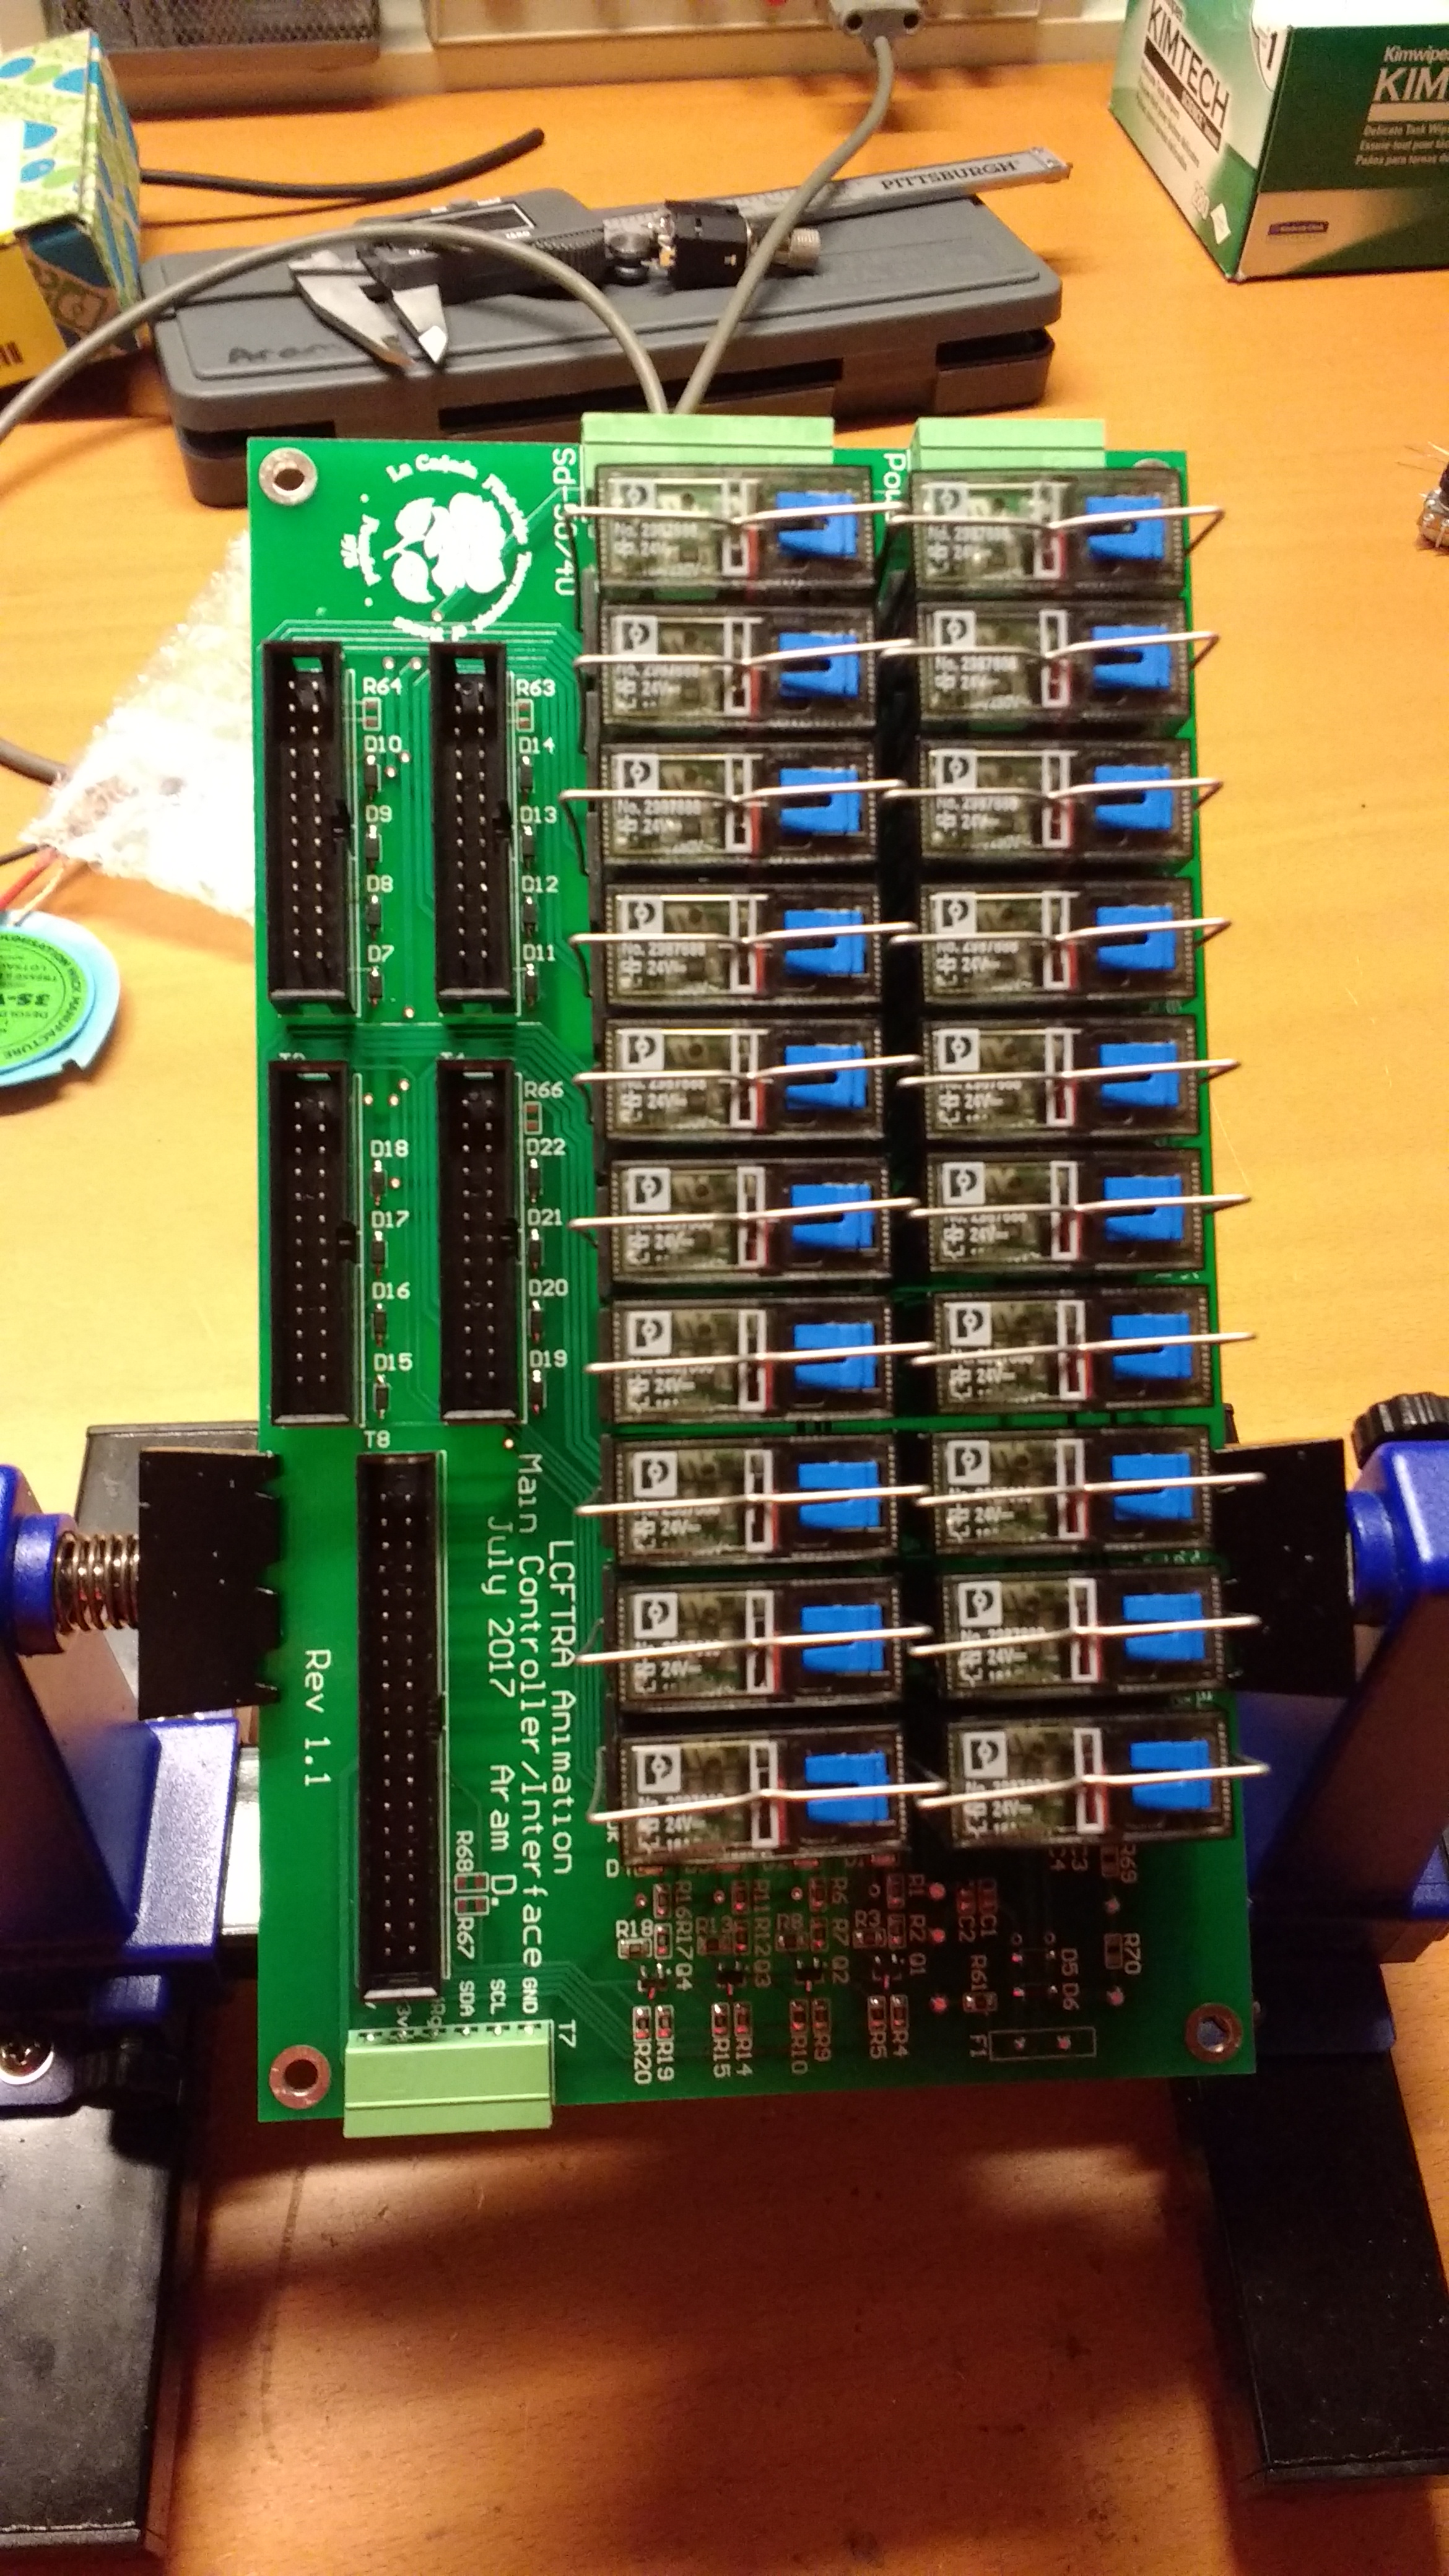 The assembled controller PCB in an assembly stand